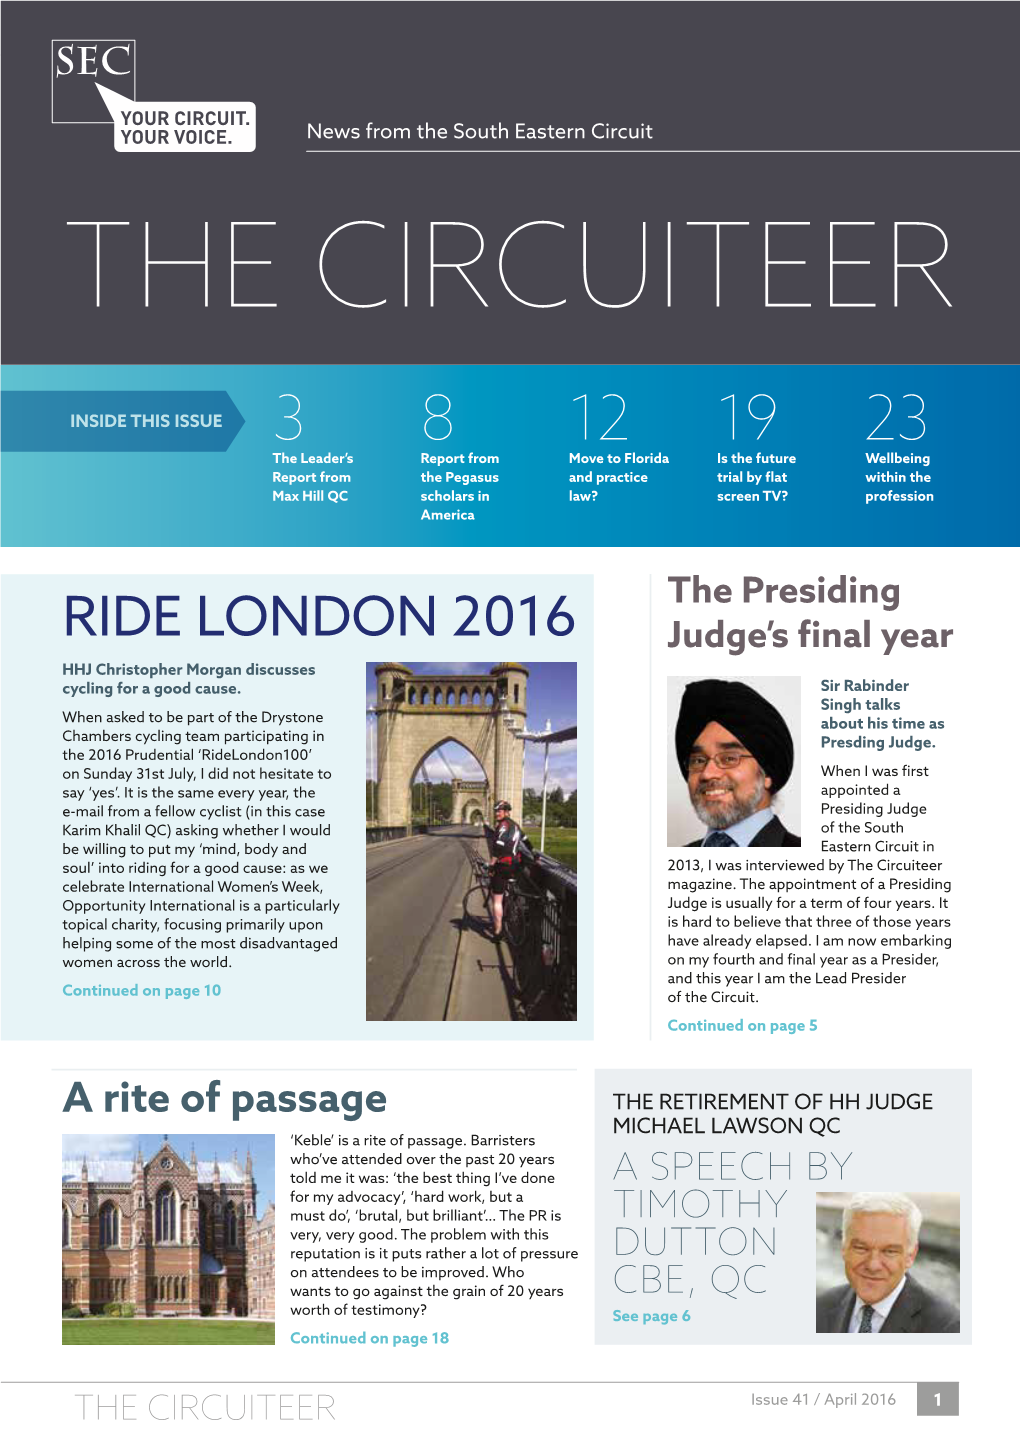 THE CIRCUITEER Issue 41 / April 2016 1 News from the South Eastern Circuit EDITOR’S COLUMN T Has Been a Busy Time Are Prepared to Fight to Make Outstanding